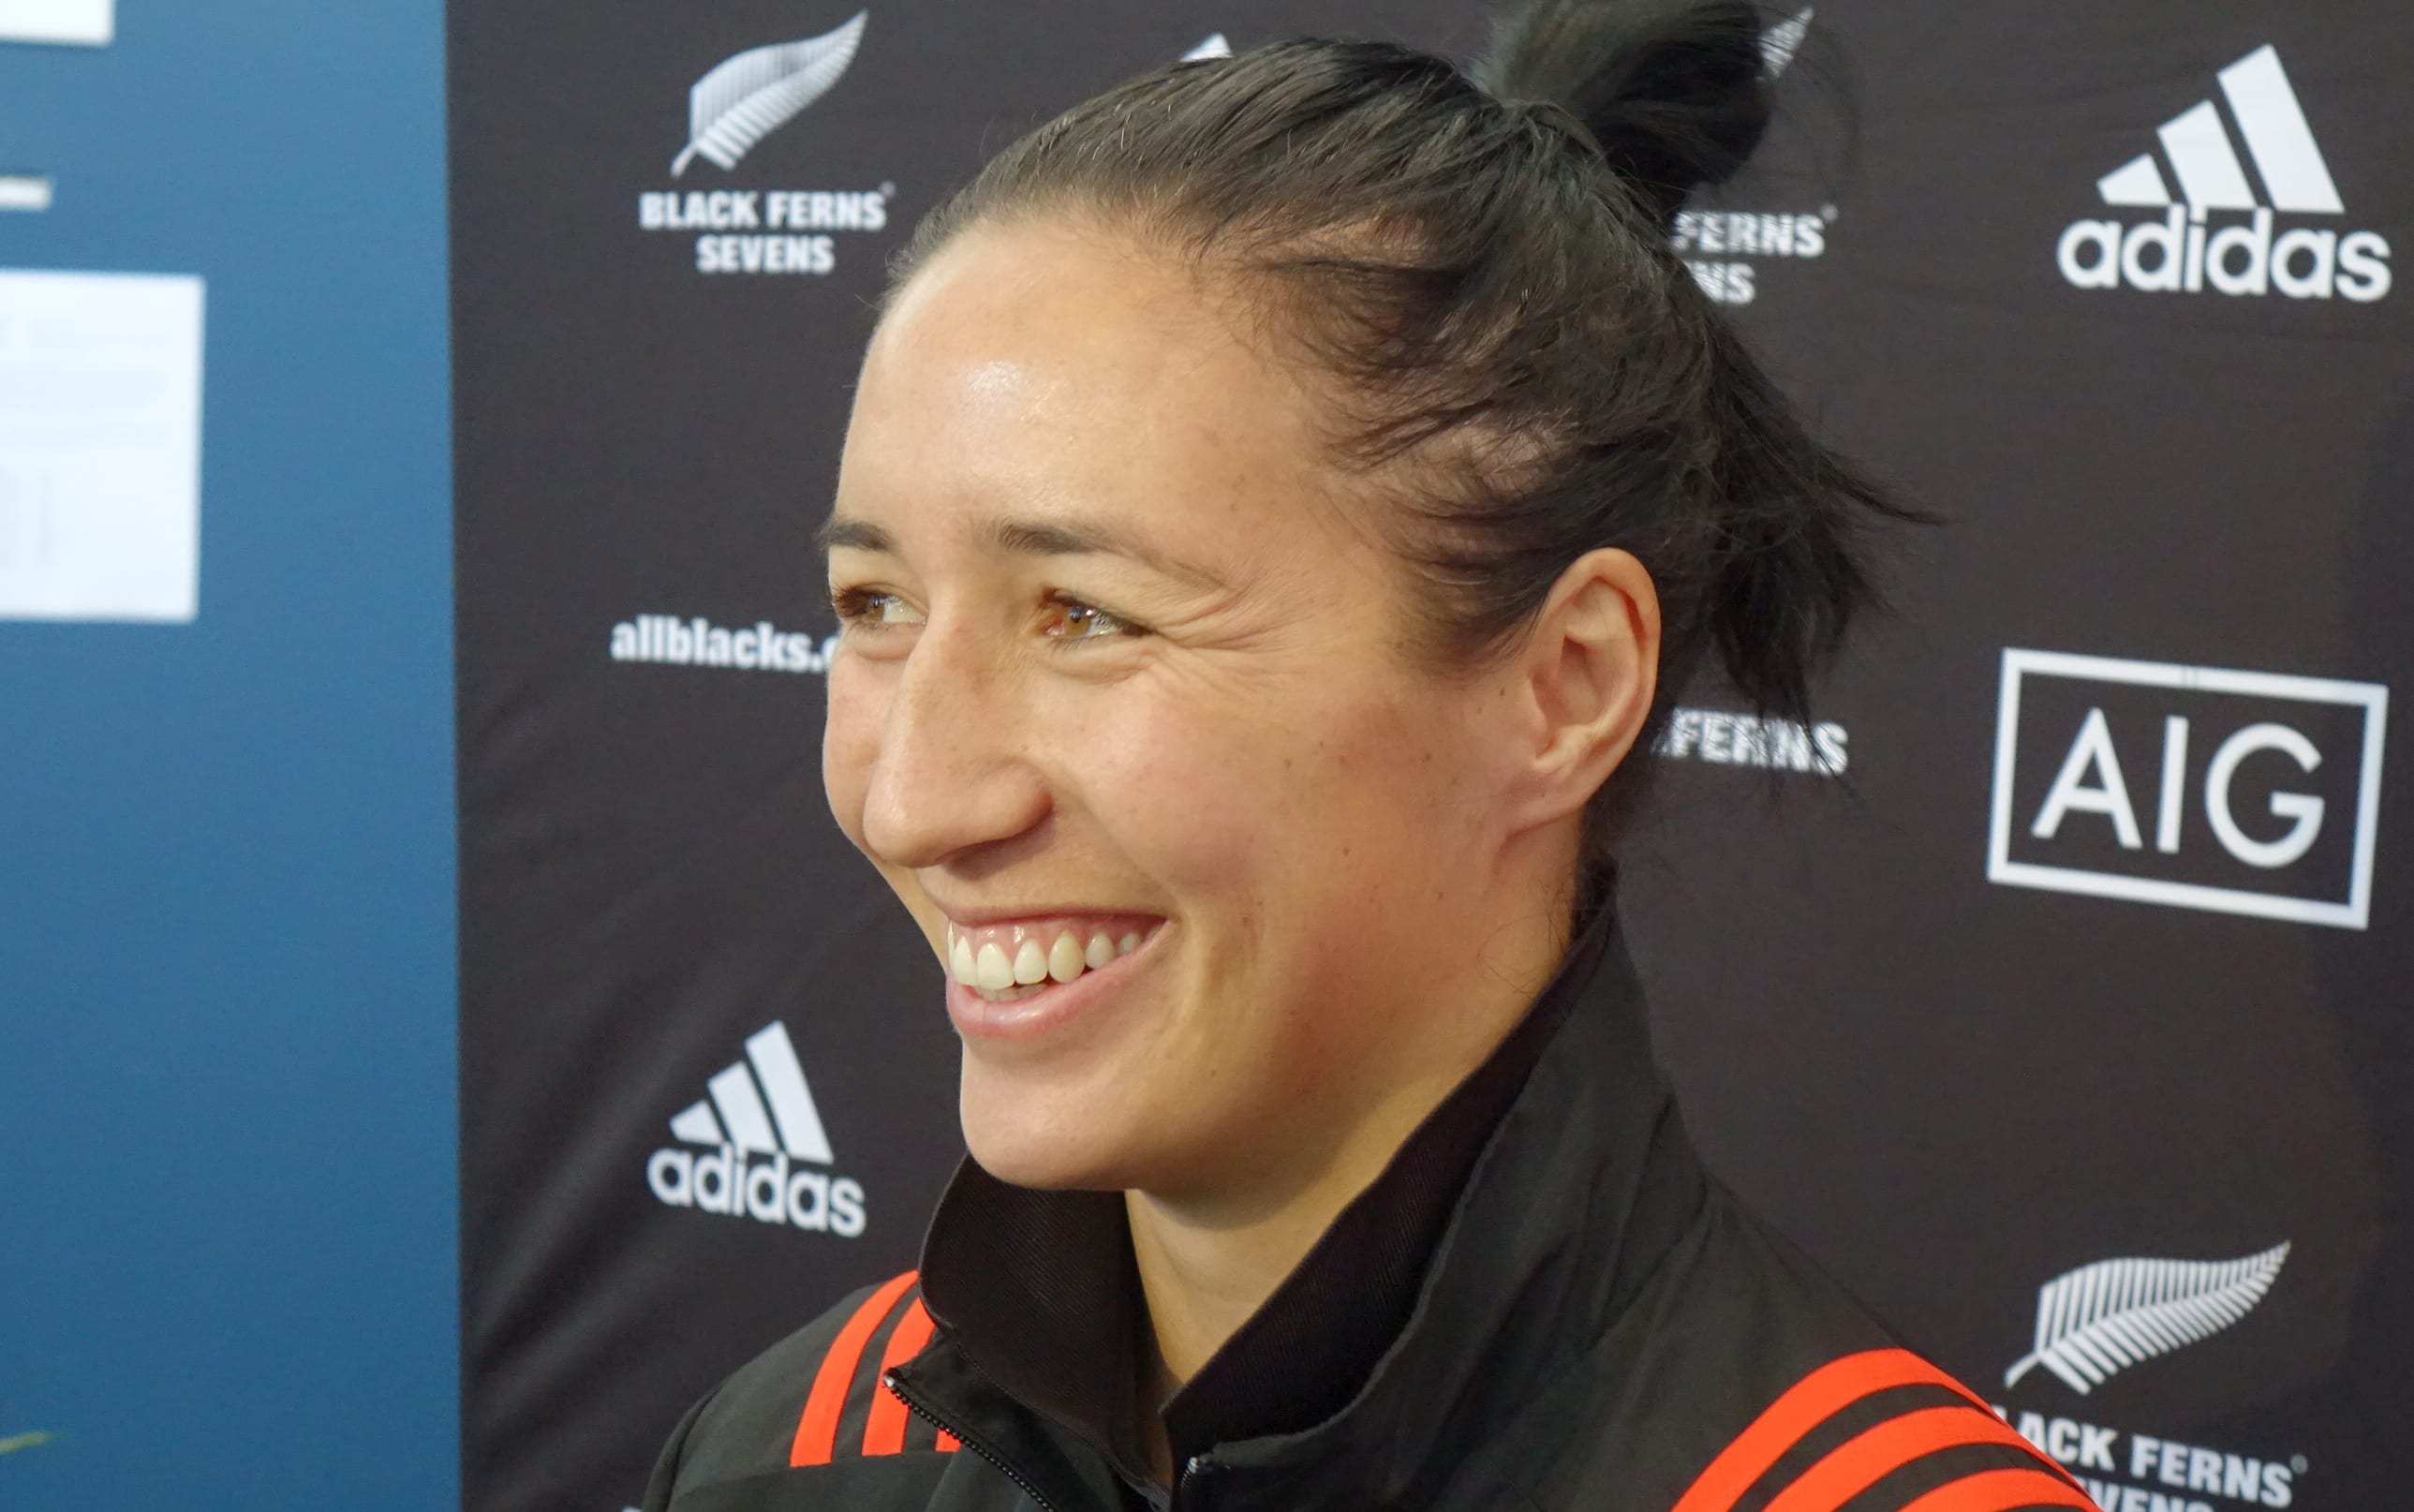 Black Ferns captain Sarah Goss qt the announcement ib 28 August of a four team tournament to coincide with the World Sevens in Hamilton in January